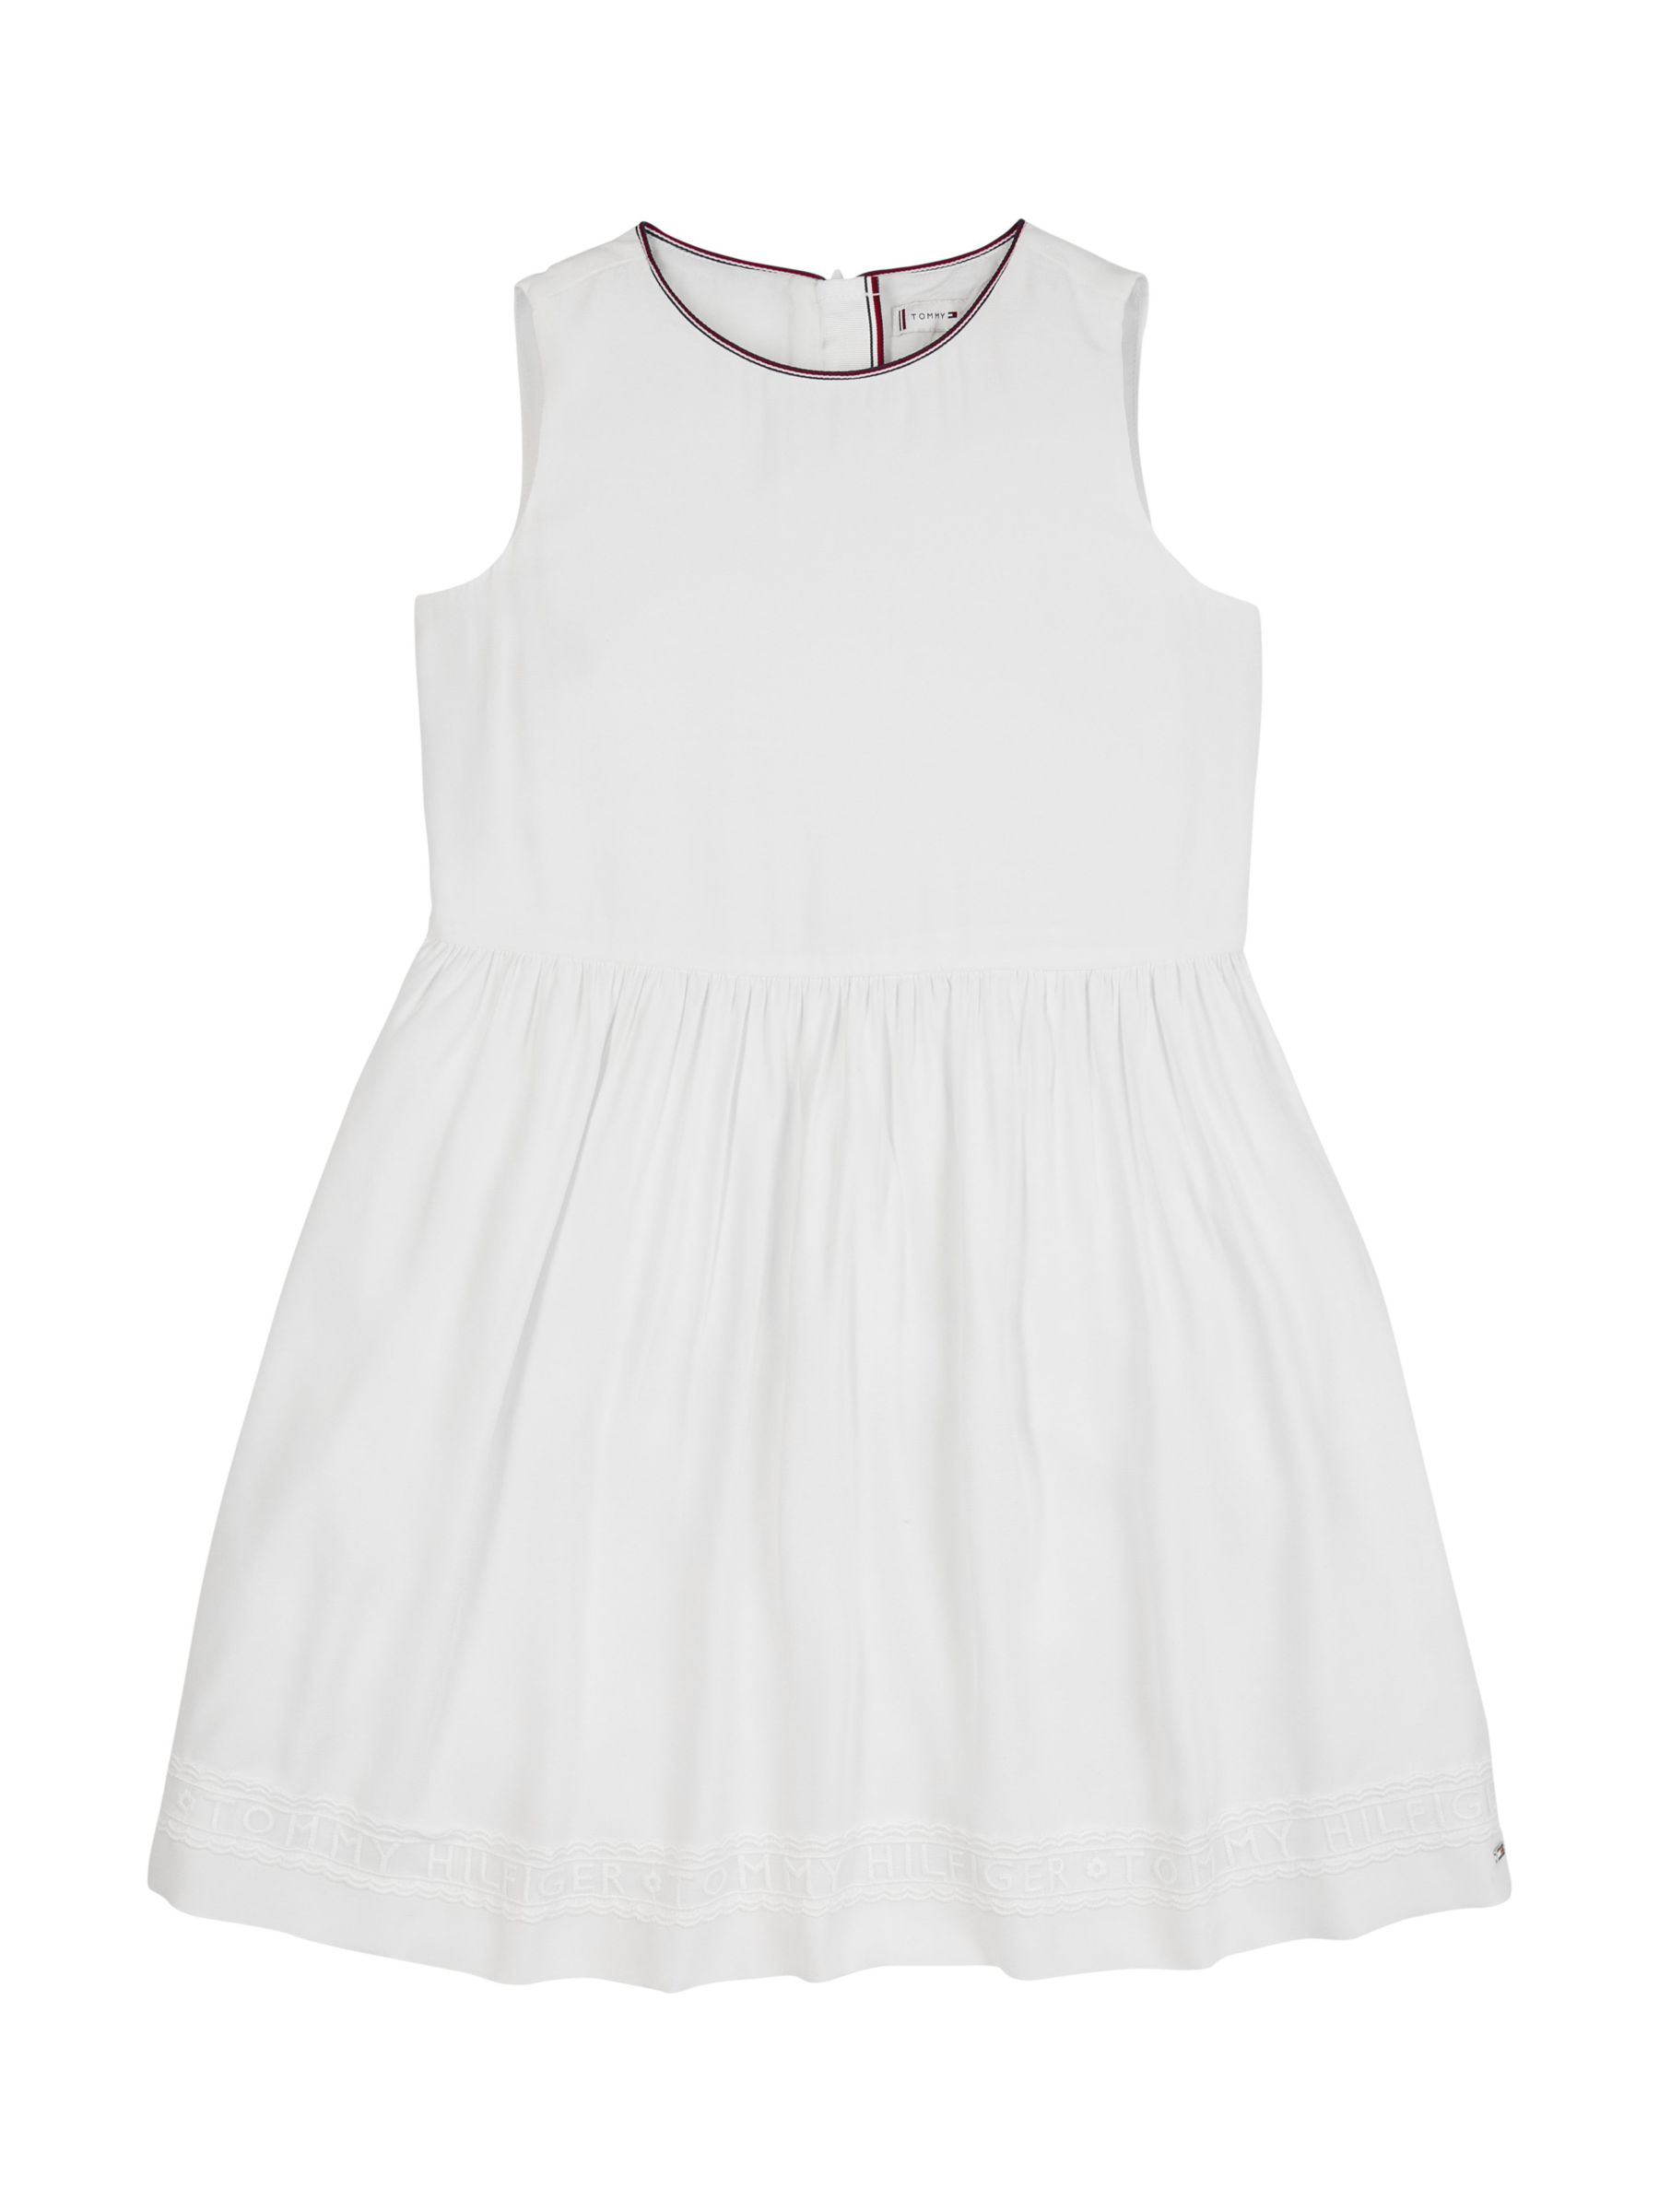 Tommy Hilfiger Kids' Lace Occasion Dress, Ancient White